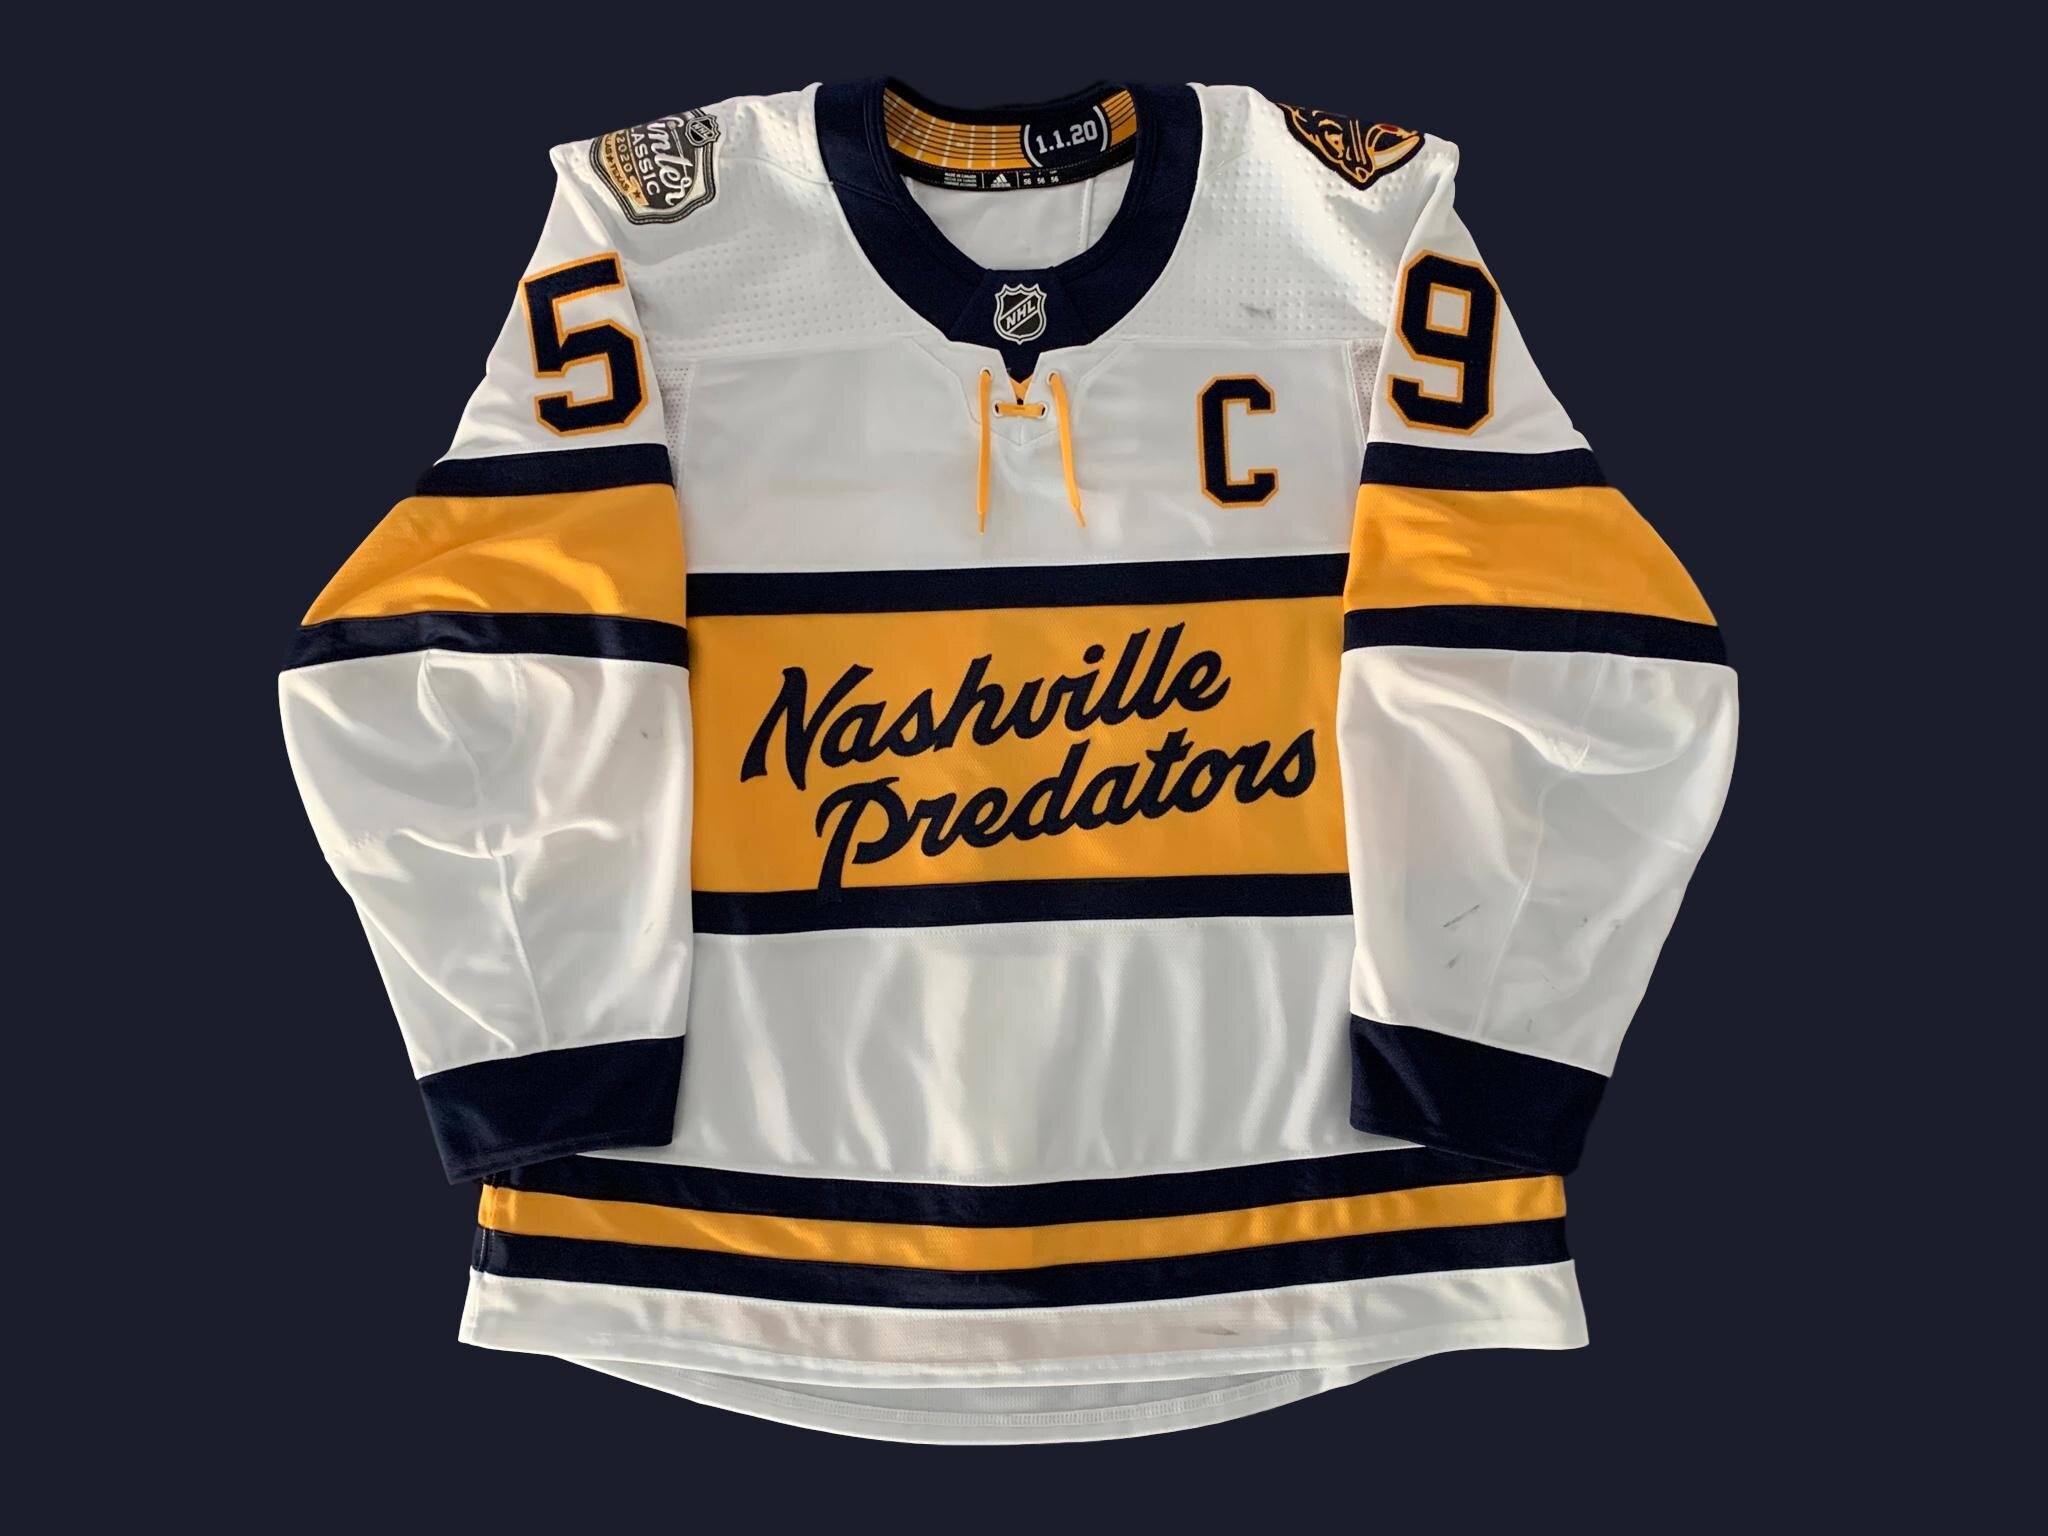 Nashville Predators unveil Winter Classic jerseys to widely-mixed reviews